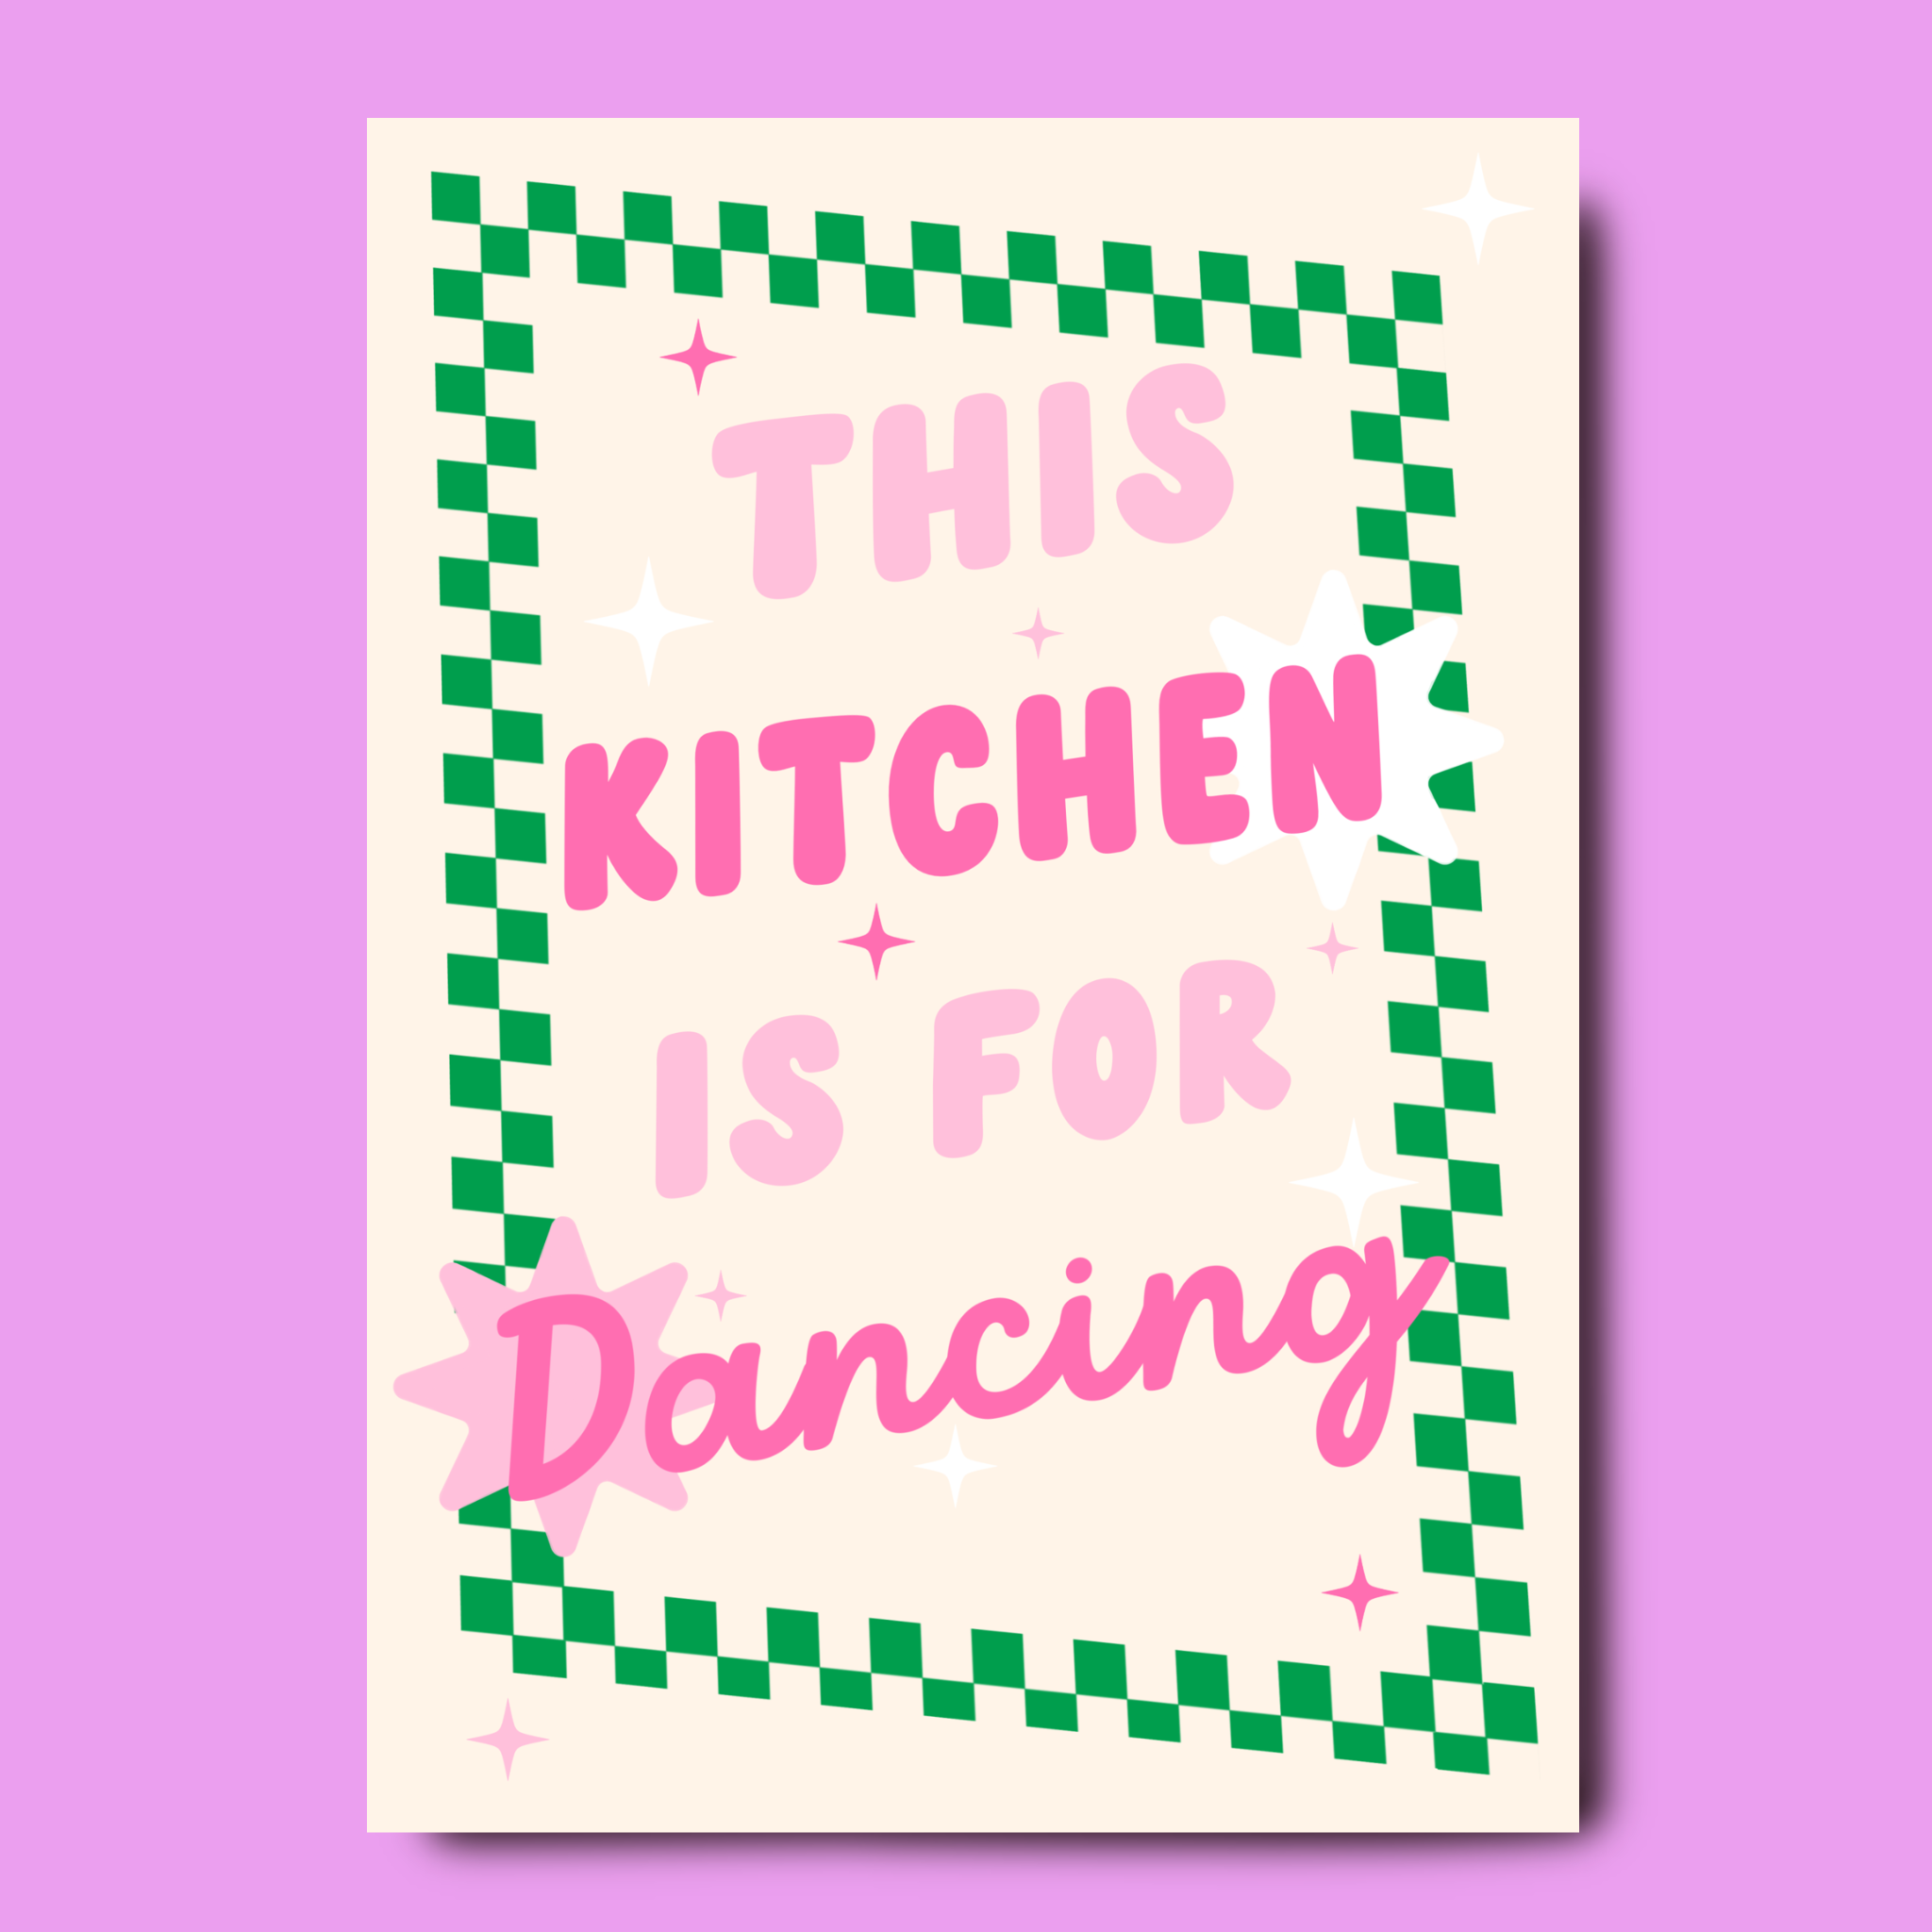 This _ is for dancing – green print